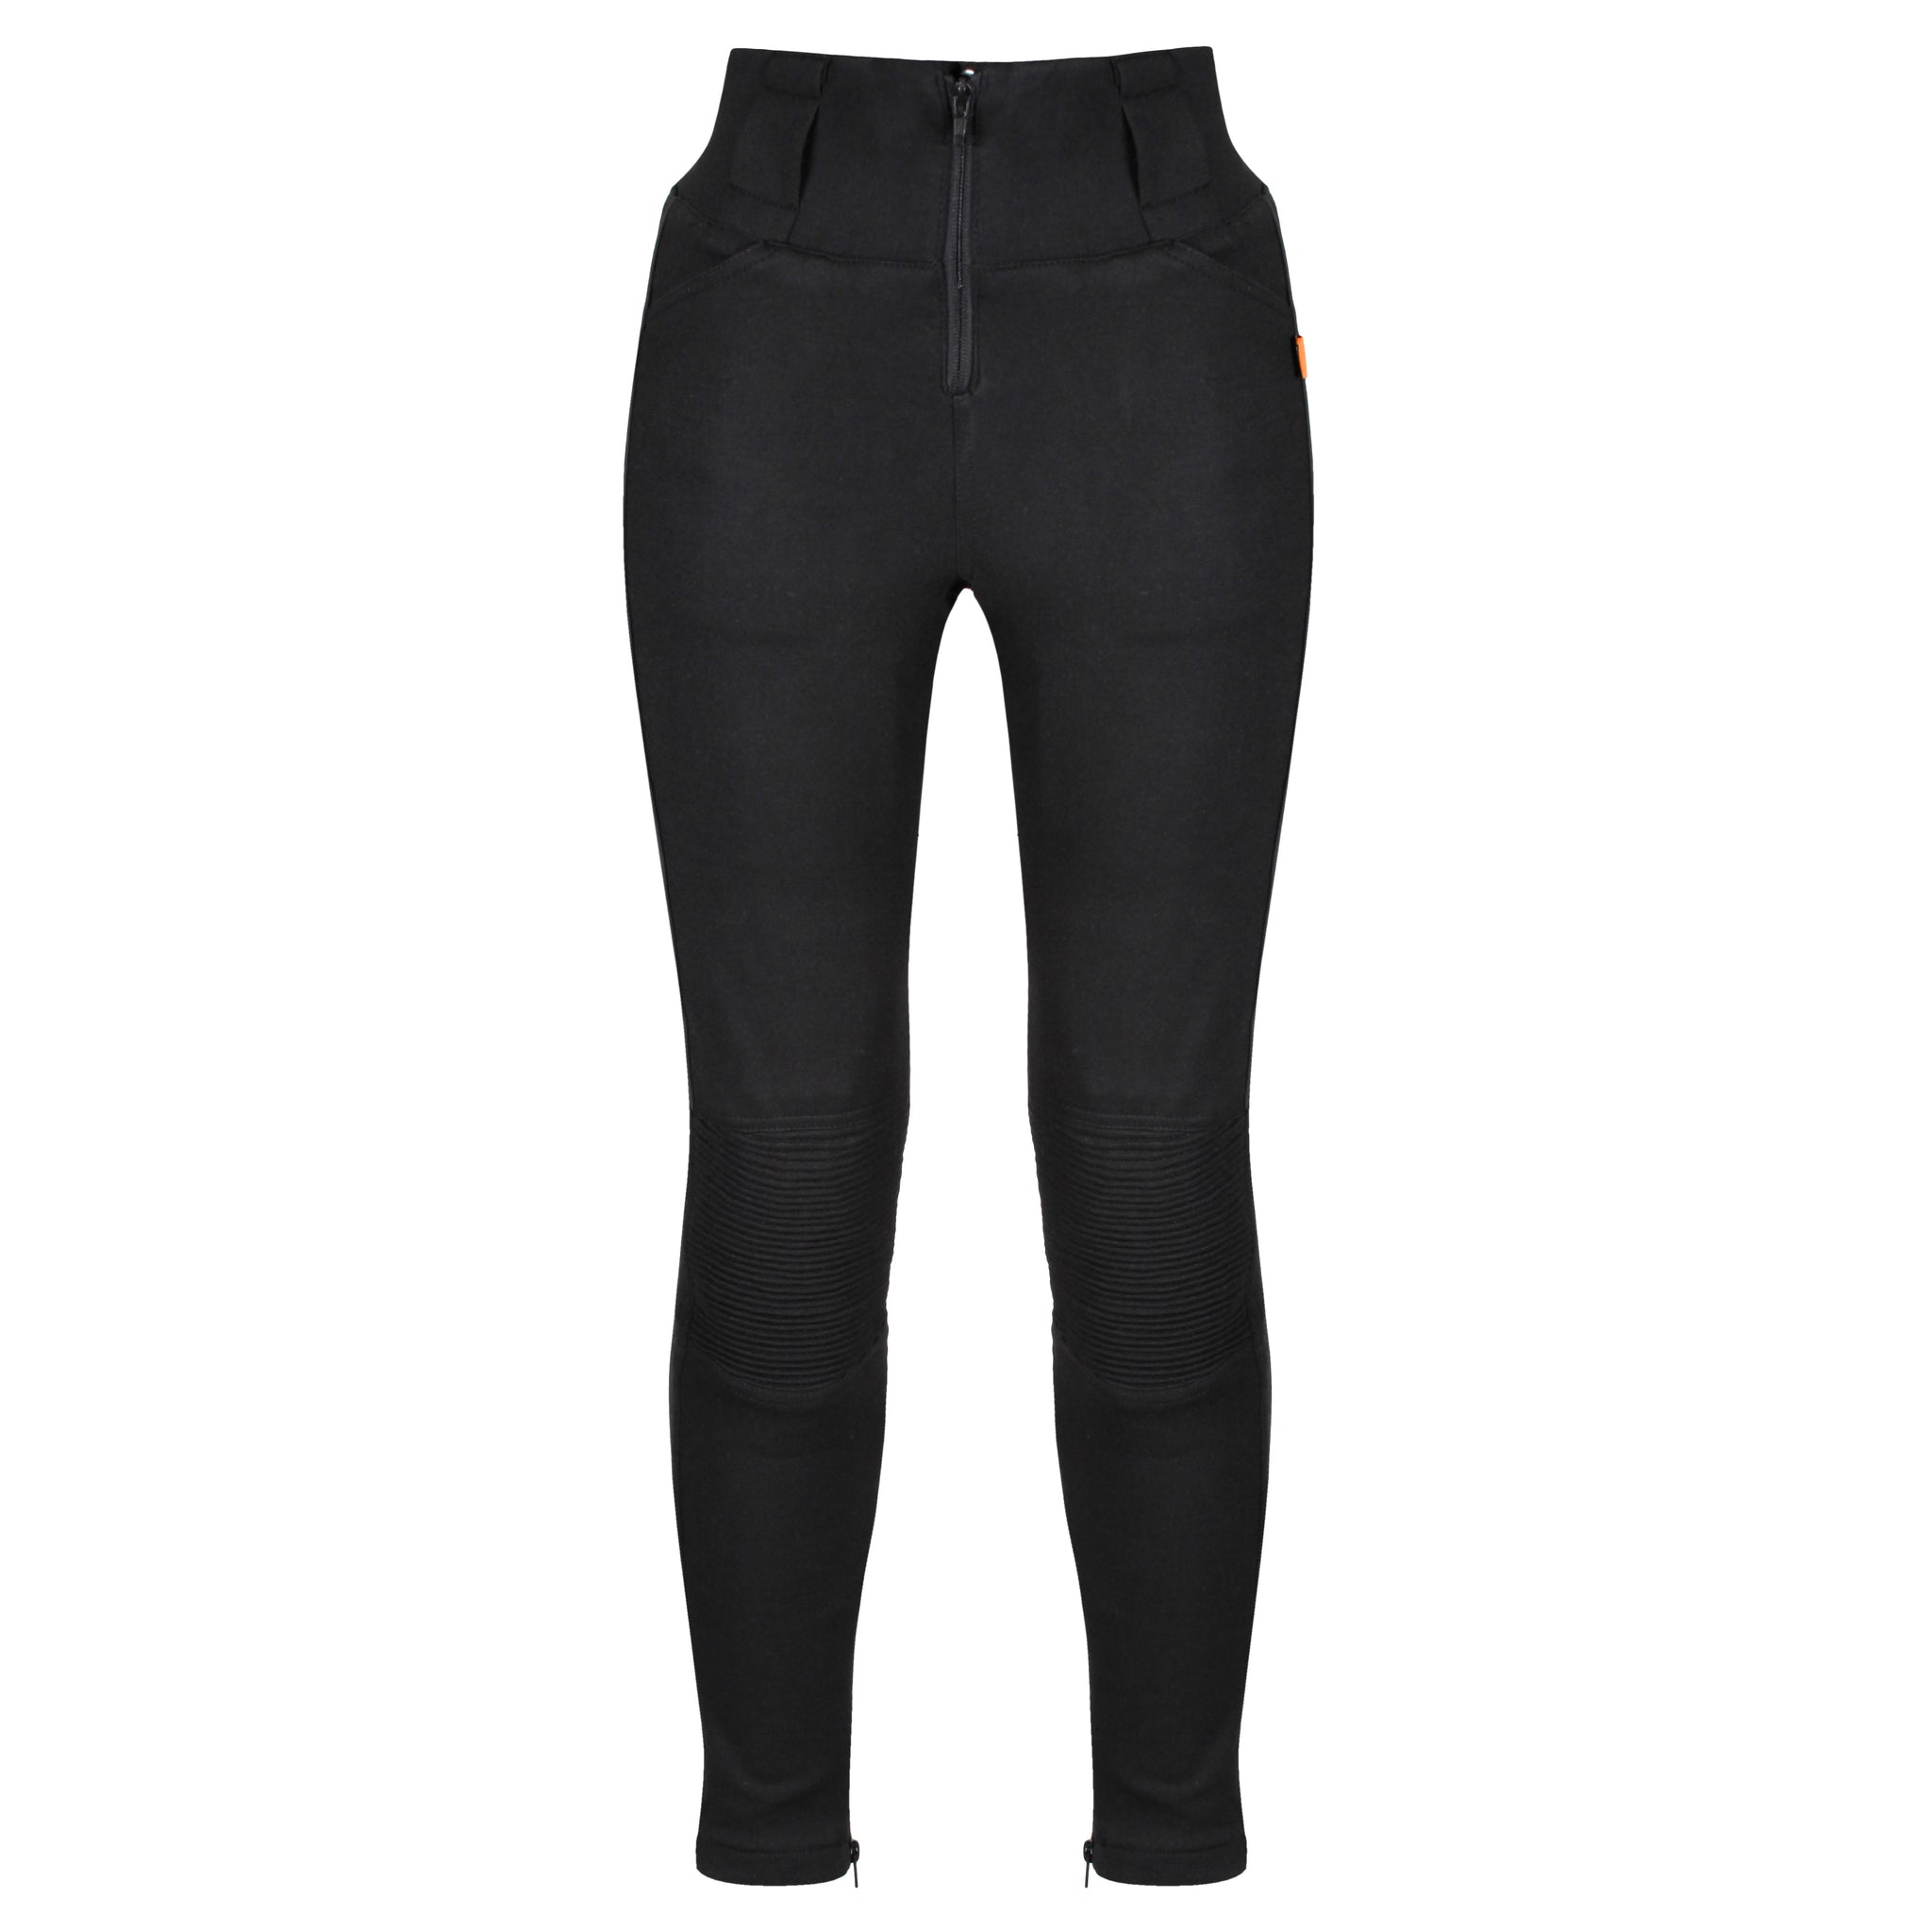 Motorcycle leggings for woman with a zip from MotoGirl